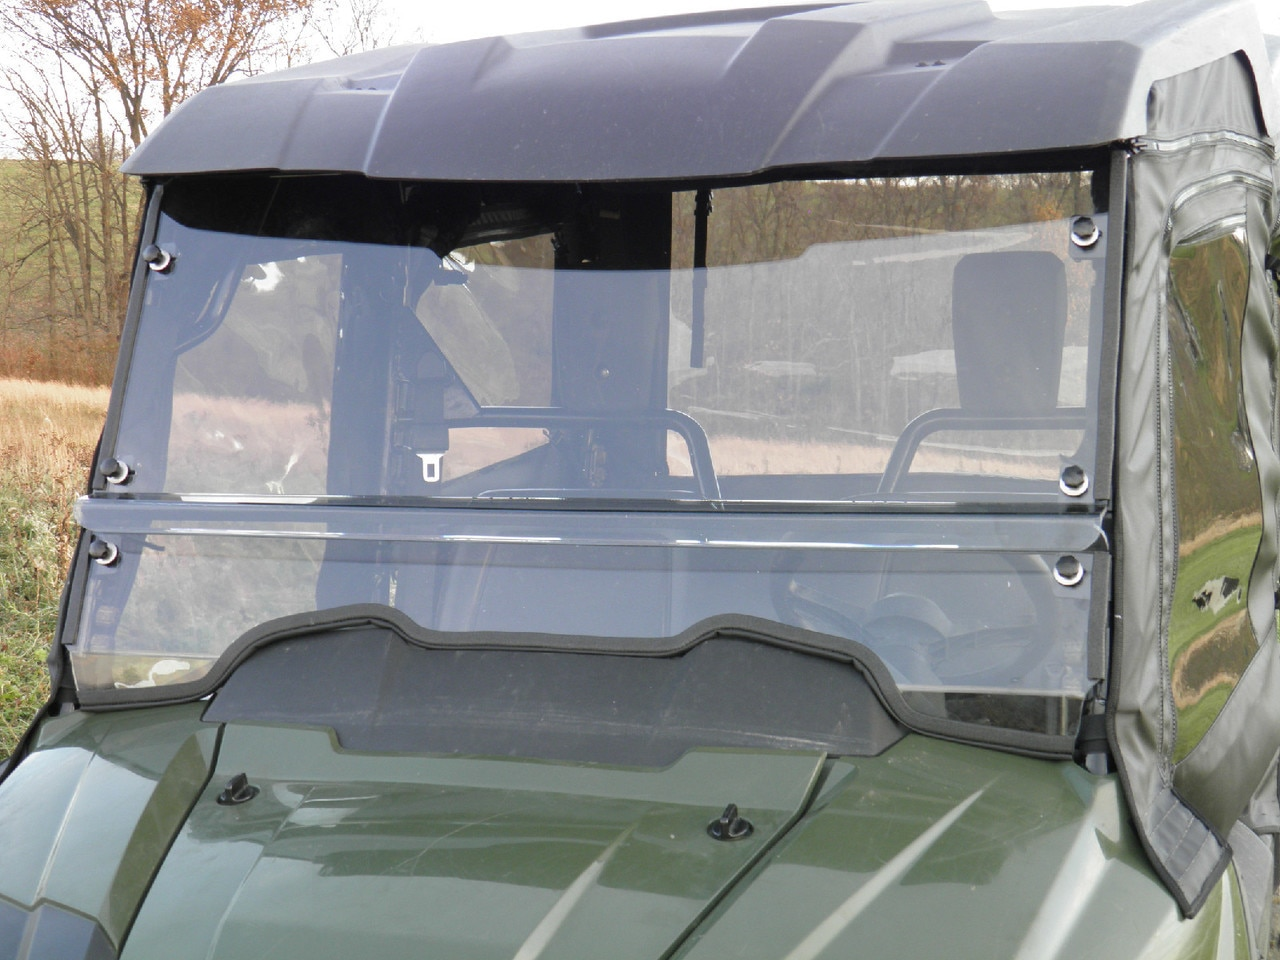 3 Star side x side Honda Pioneer 700-4 windshield front view close up